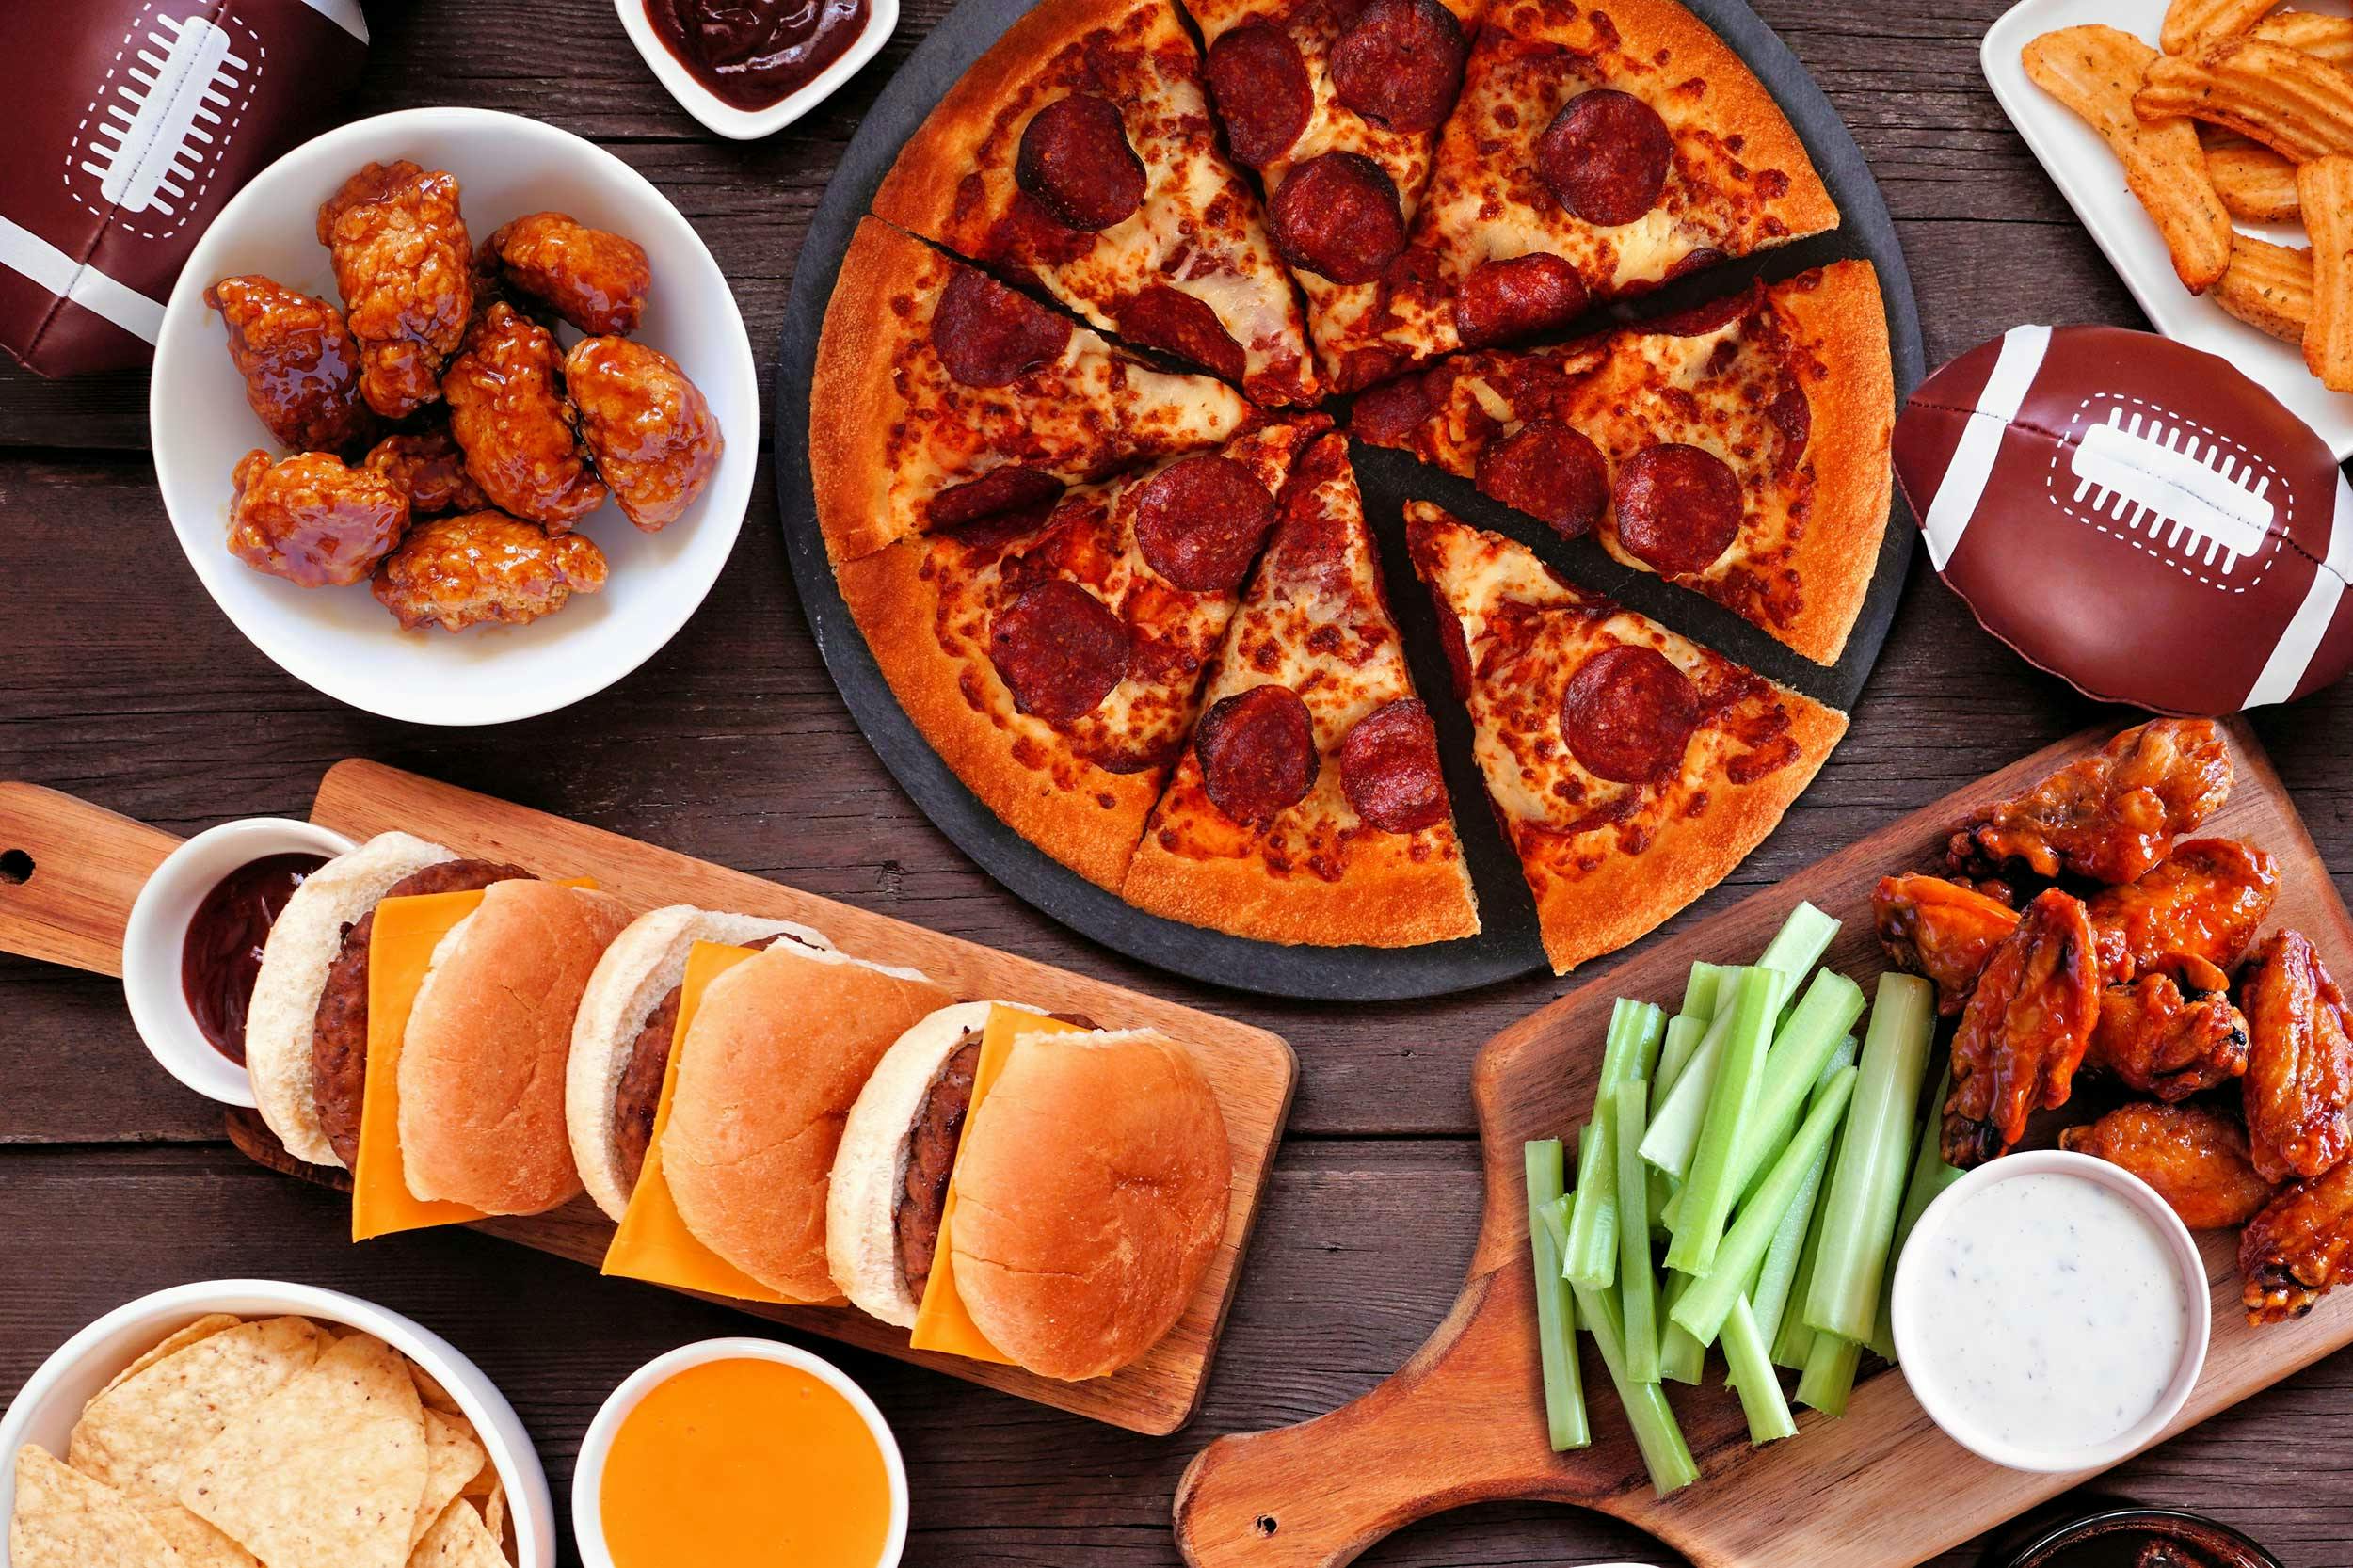 The definitive carbon ranking of Super Bowl snacks